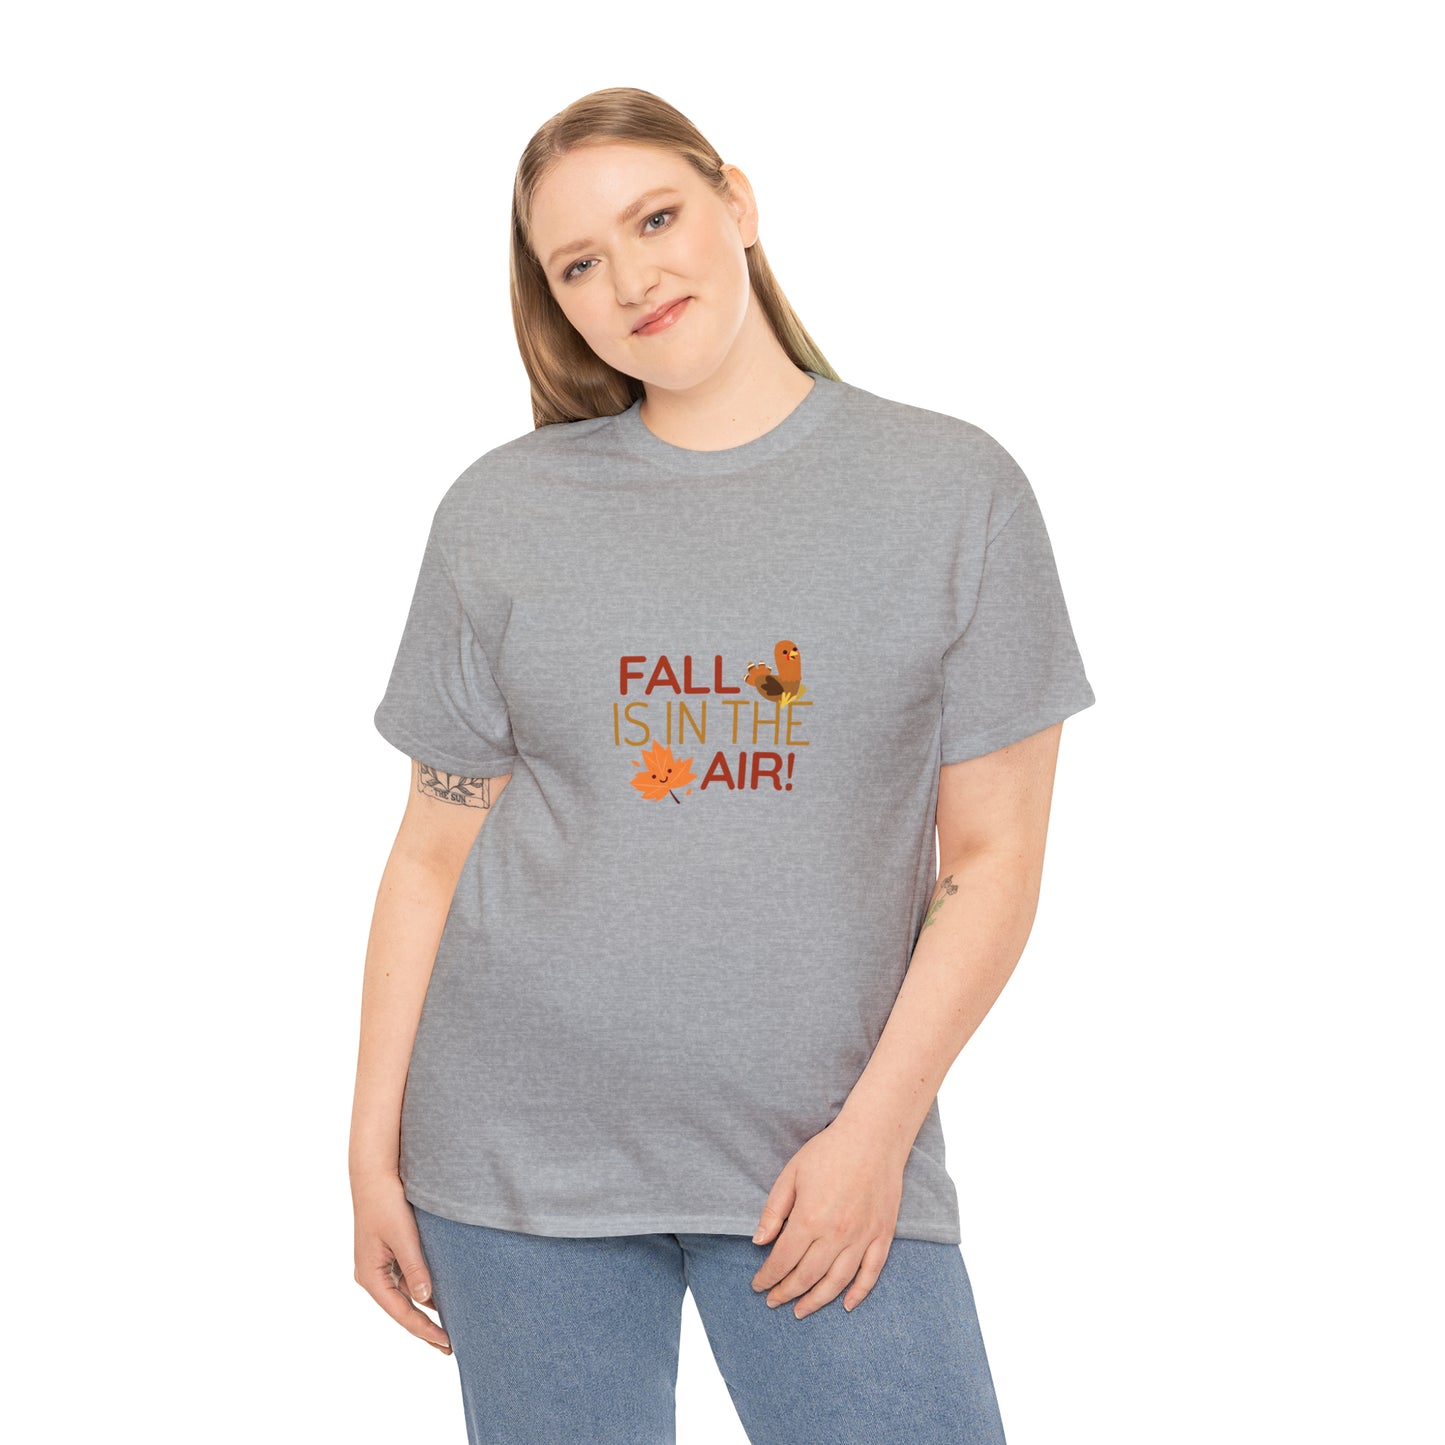 "Fall is in the air" Unisex Heavy Cotton Tee